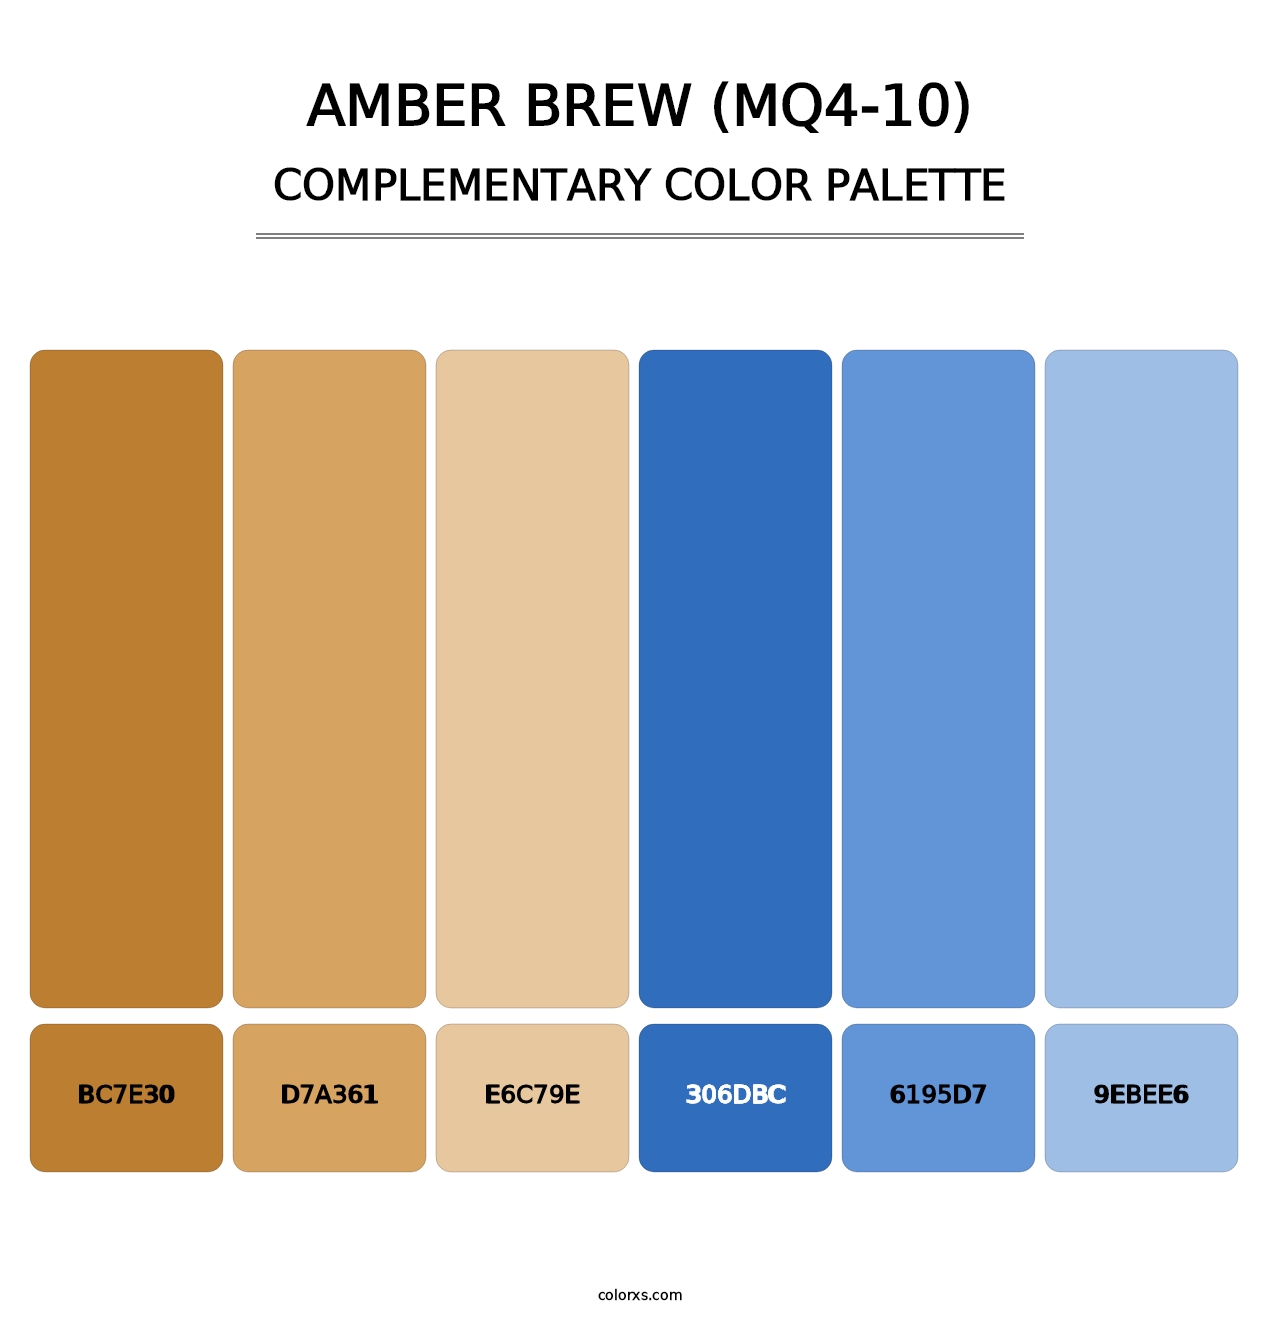 Amber Brew (MQ4-10) - Complementary Color Palette